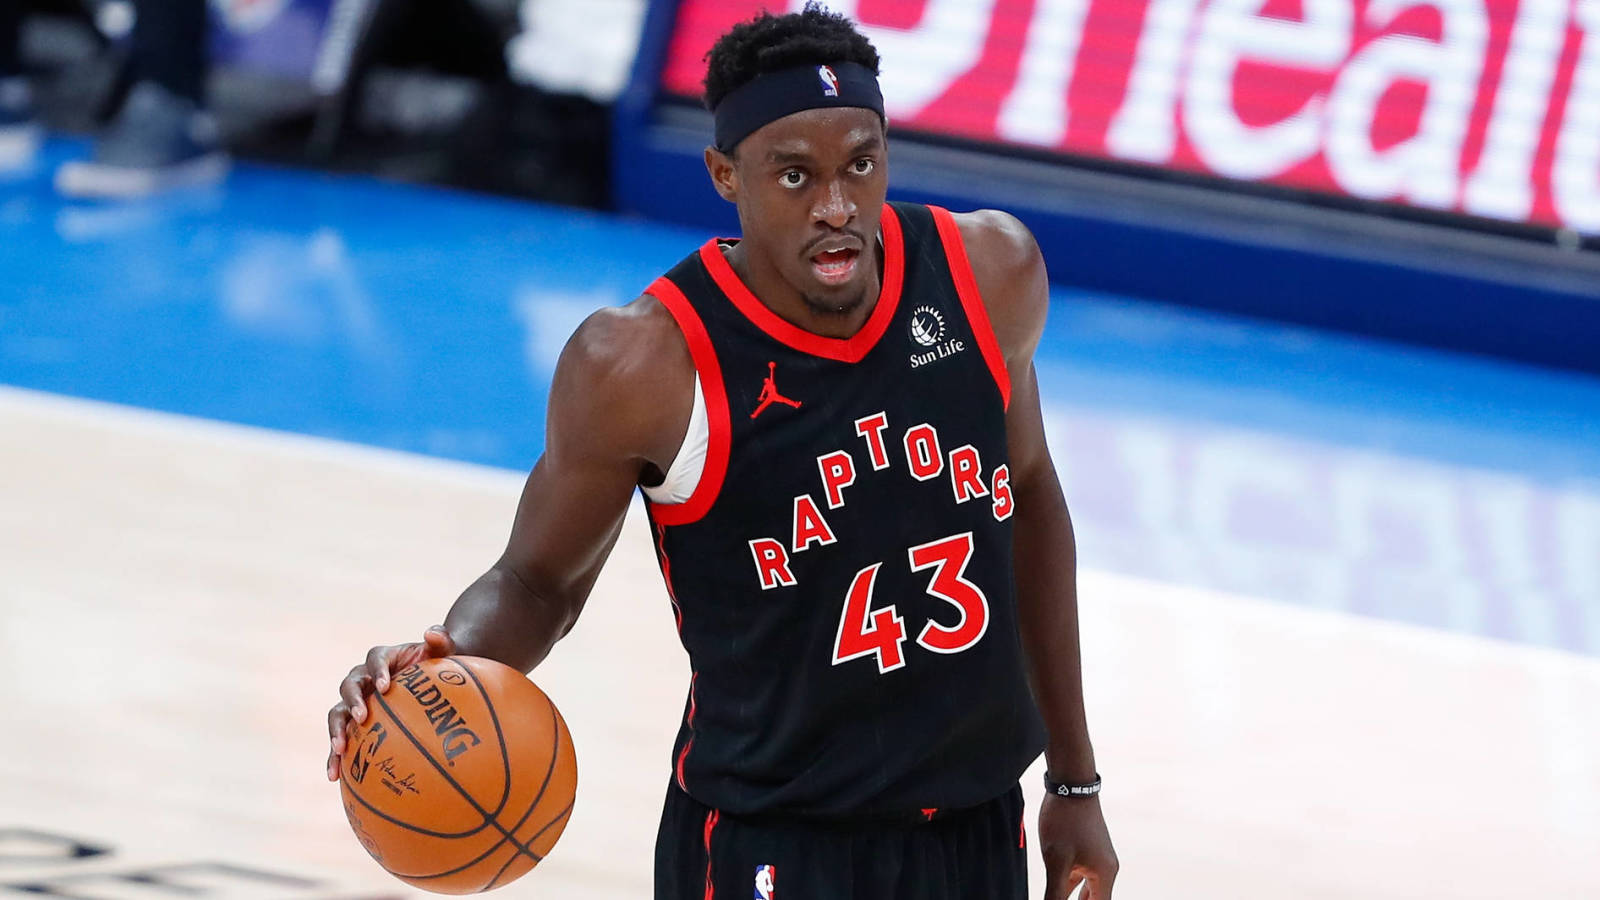 Report: Pascal Siakam wants to stay with Raptors amid trade rumors